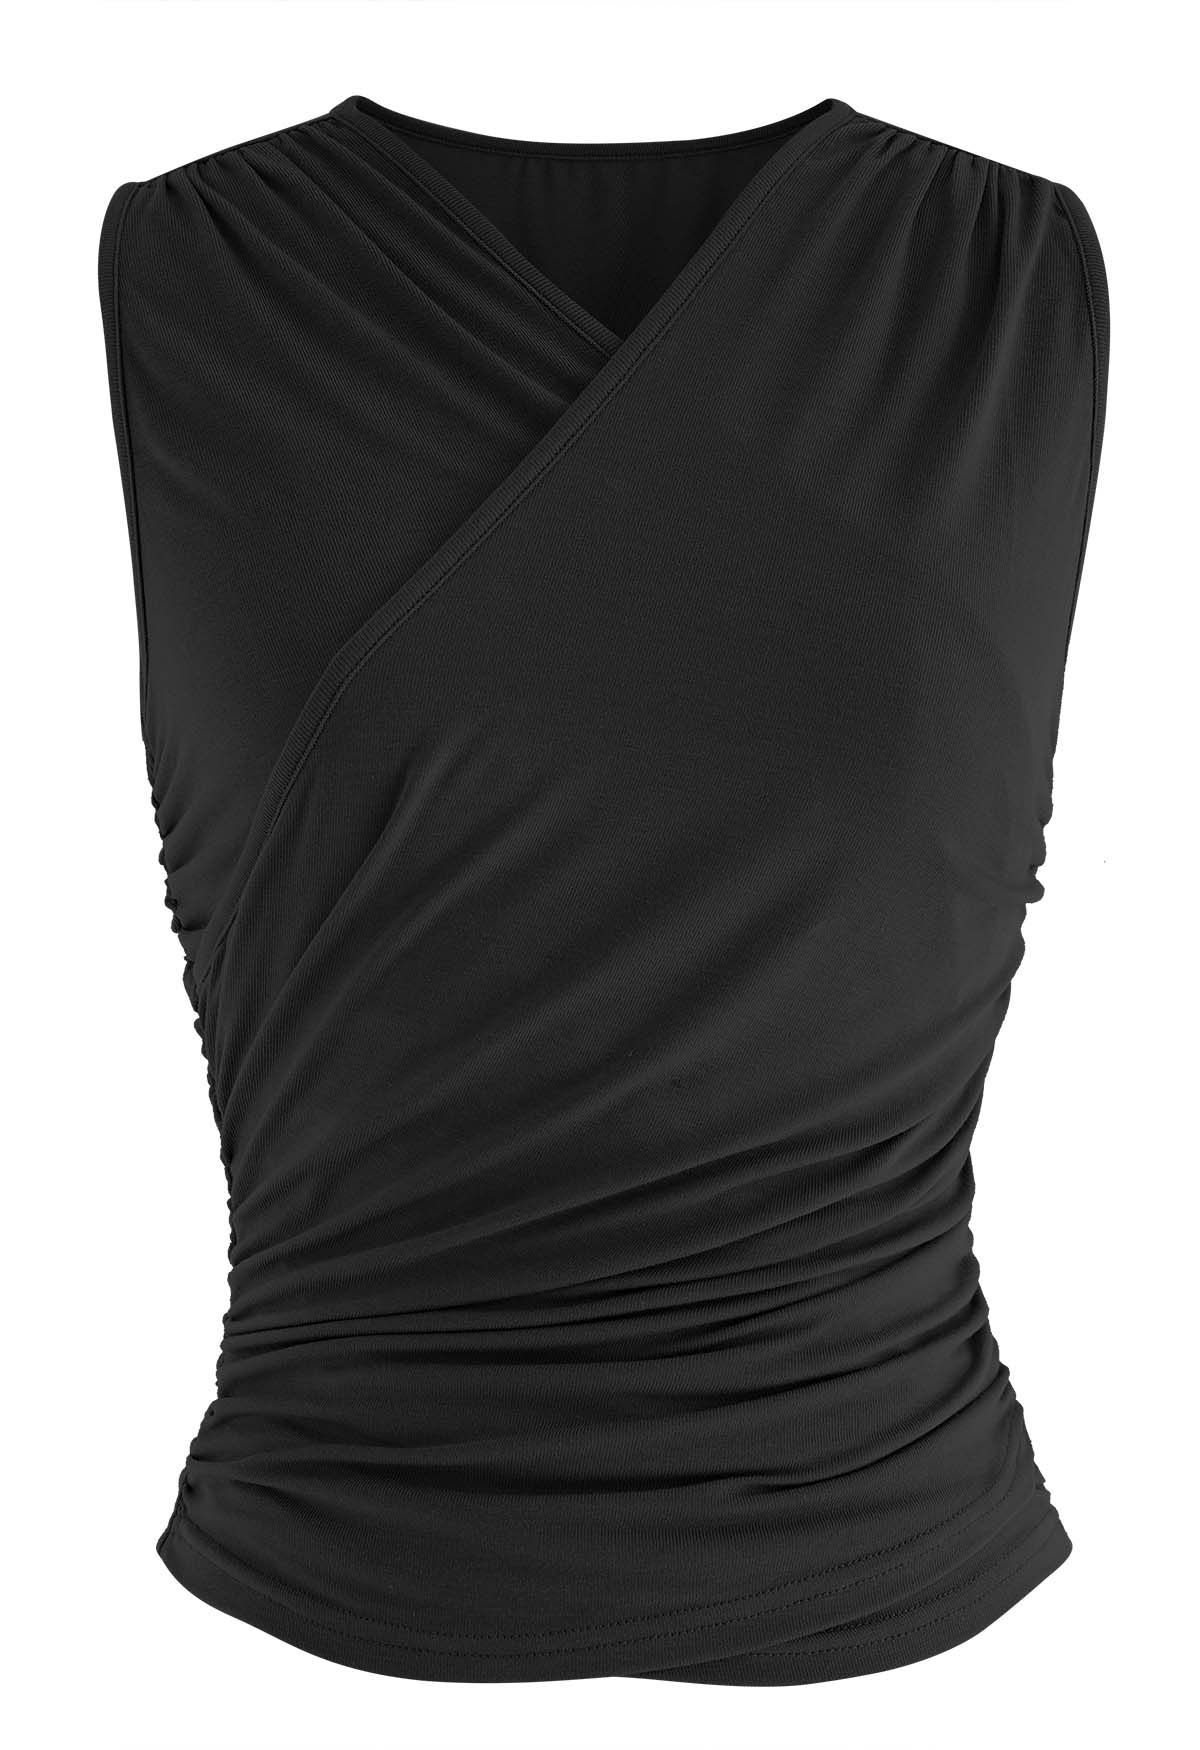 Faux-Wrap Ruched Sleeveless Top in Black - Retro, Indie and Unique Fashion